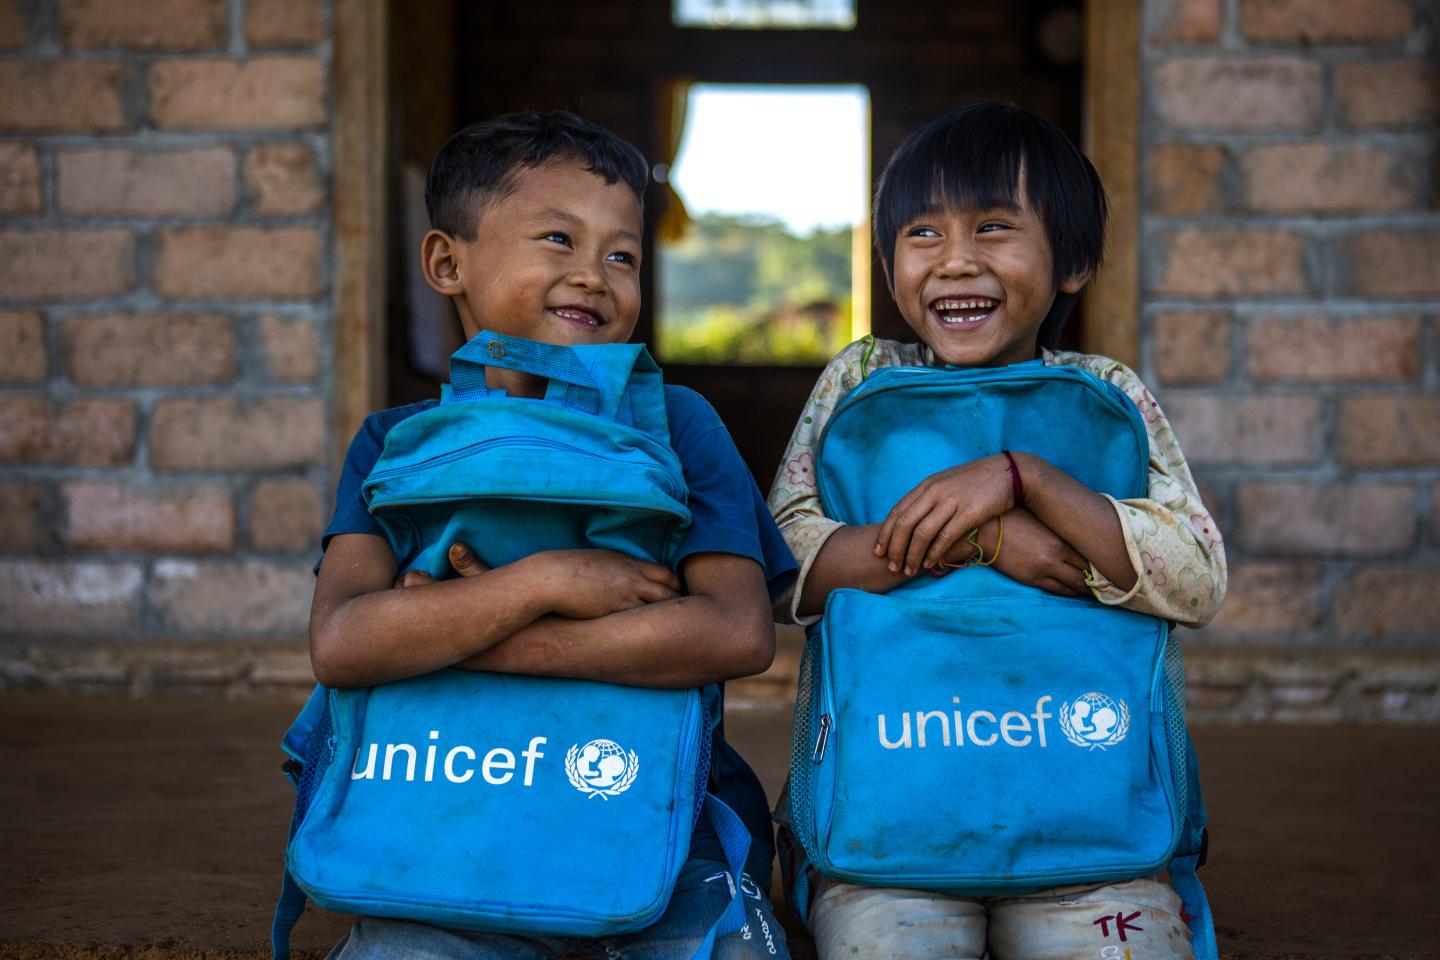 UNICEF is working to protect the rights of children.